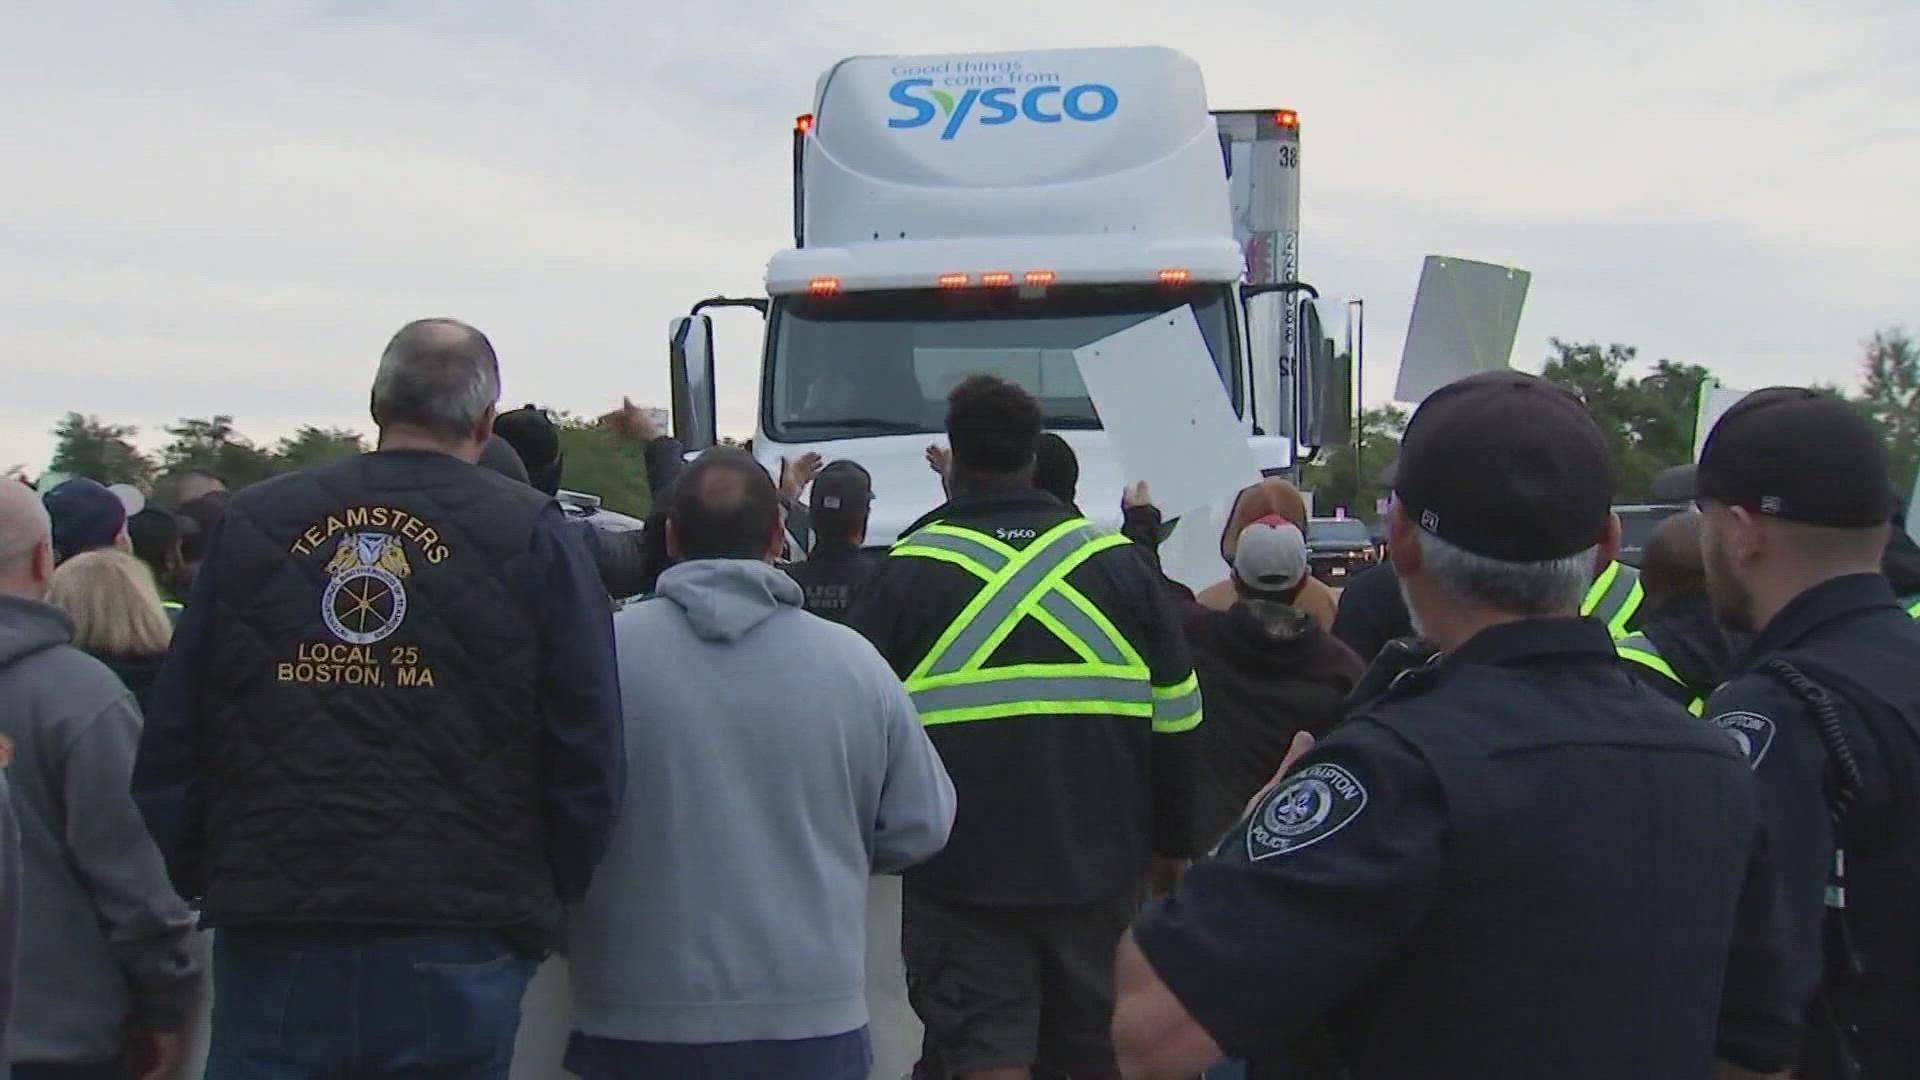 More than 300 truck drivers took to the picket line at Sysco Boston early Saturday seeking better pay and benefits.